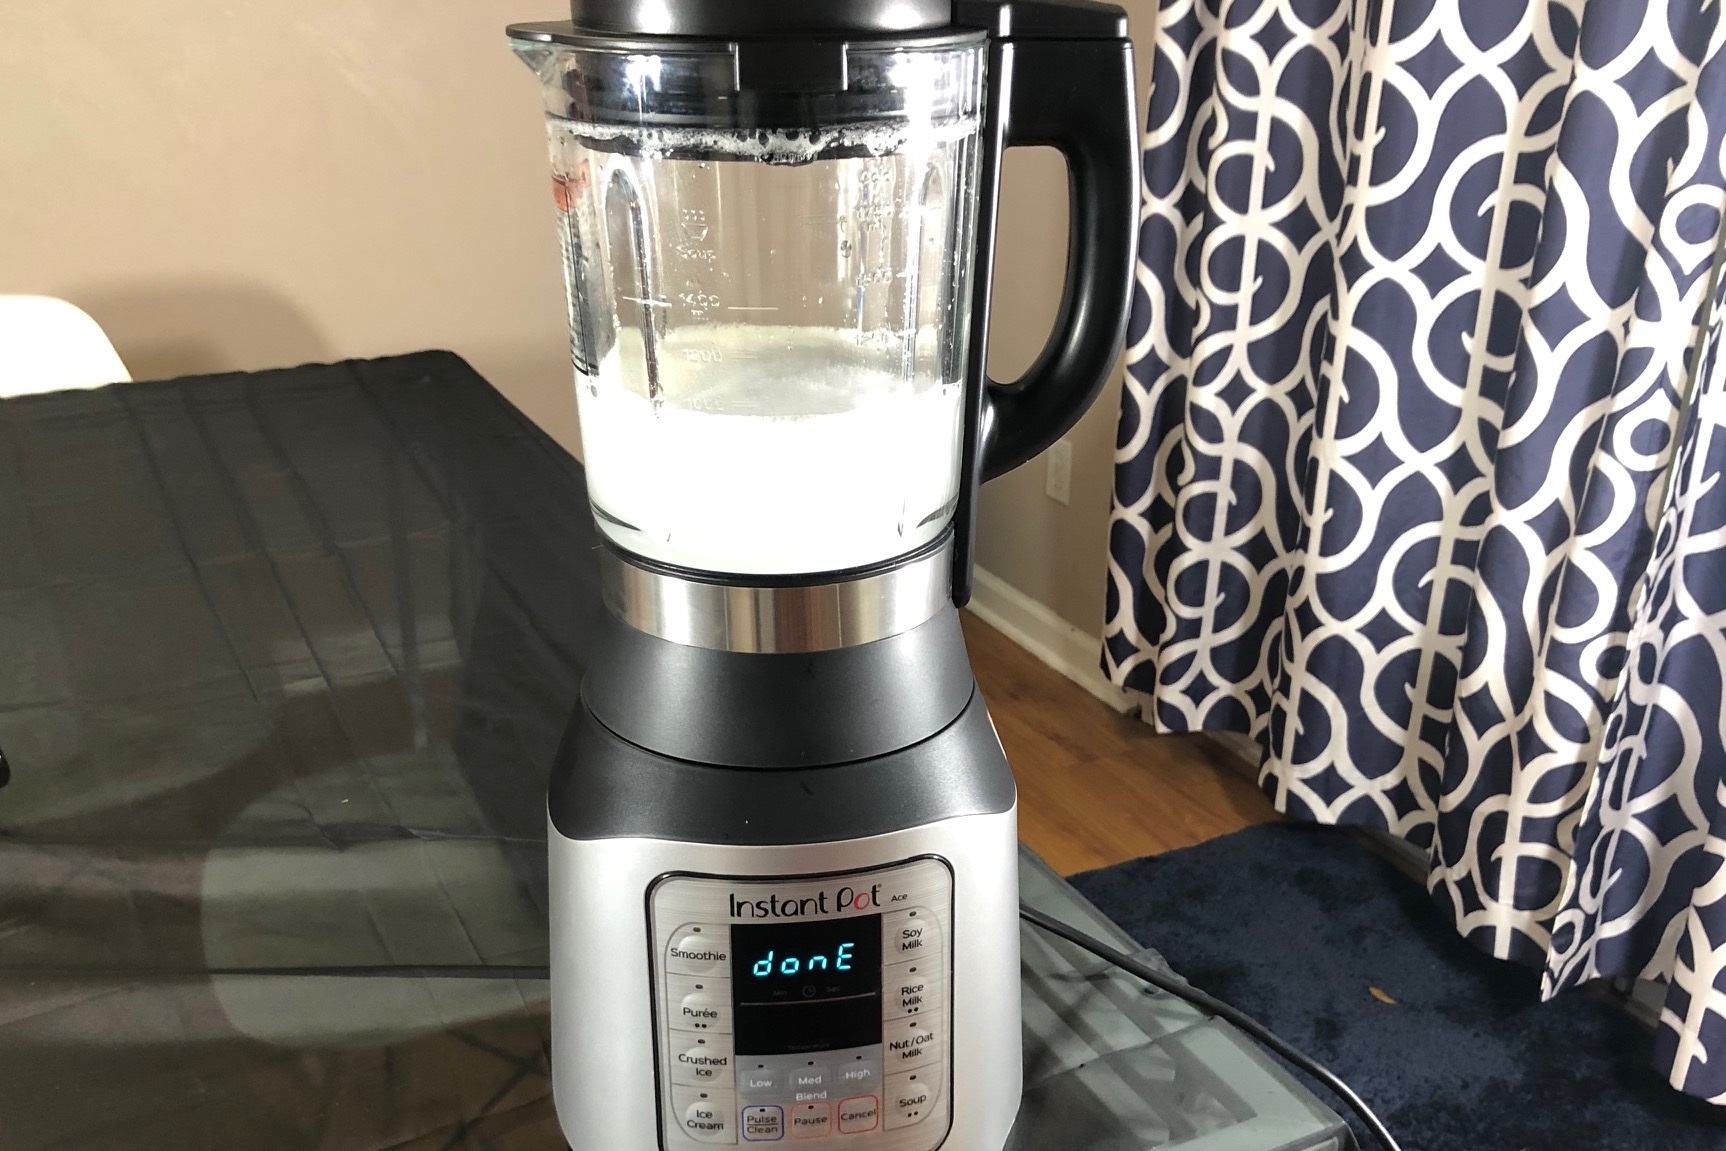 Instant Pot Ace blender can cook and pulverize - CNET